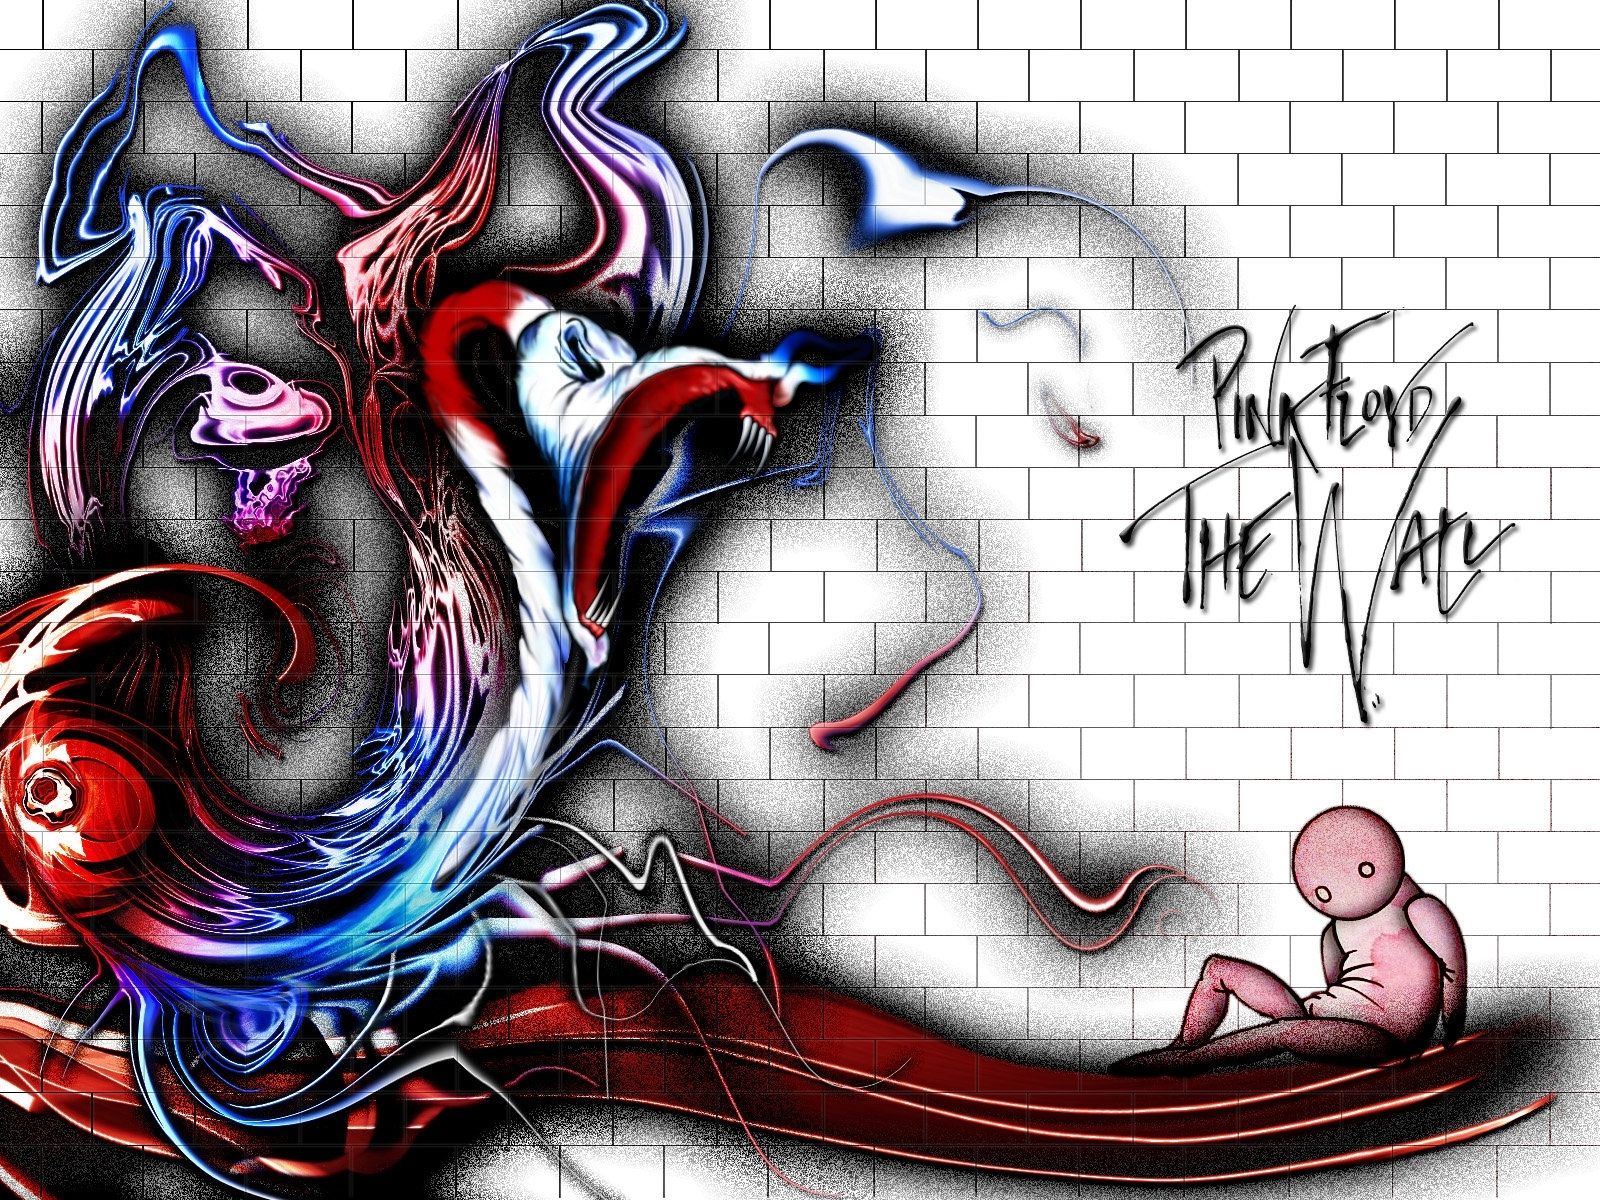 Pink' Floyd – The Wallemrat On Deviantart Within Current Pink Floyd The Wall Art (View 3 of 20)